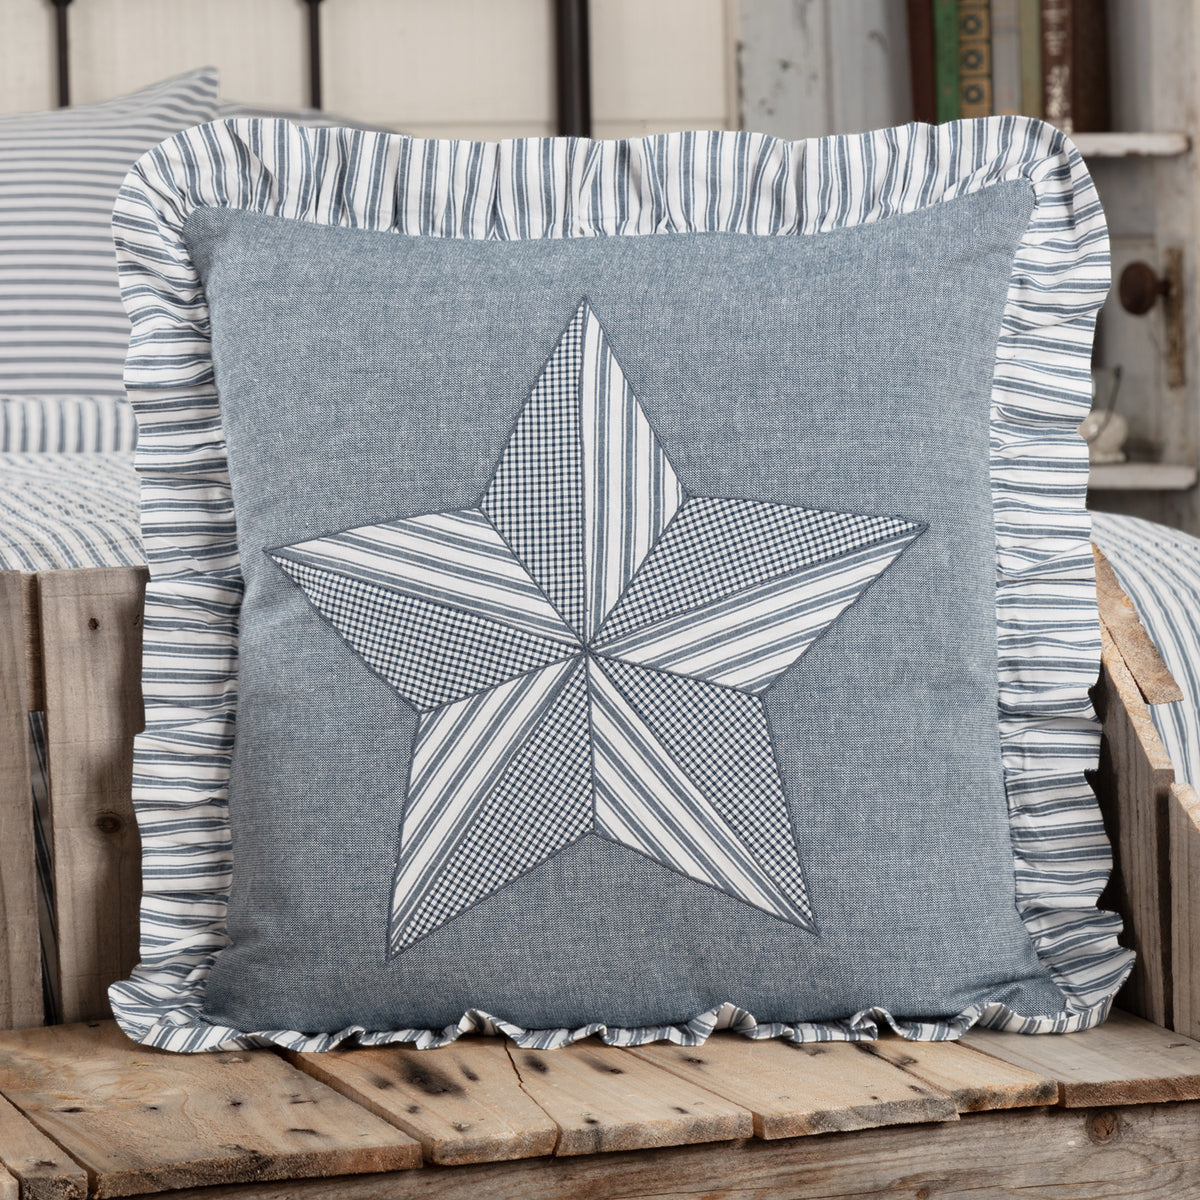 Rustic Western Country Barnwood Farmhouse Chic Grey Teal Beige Beach Wood Throw  Pillow by IamTrending